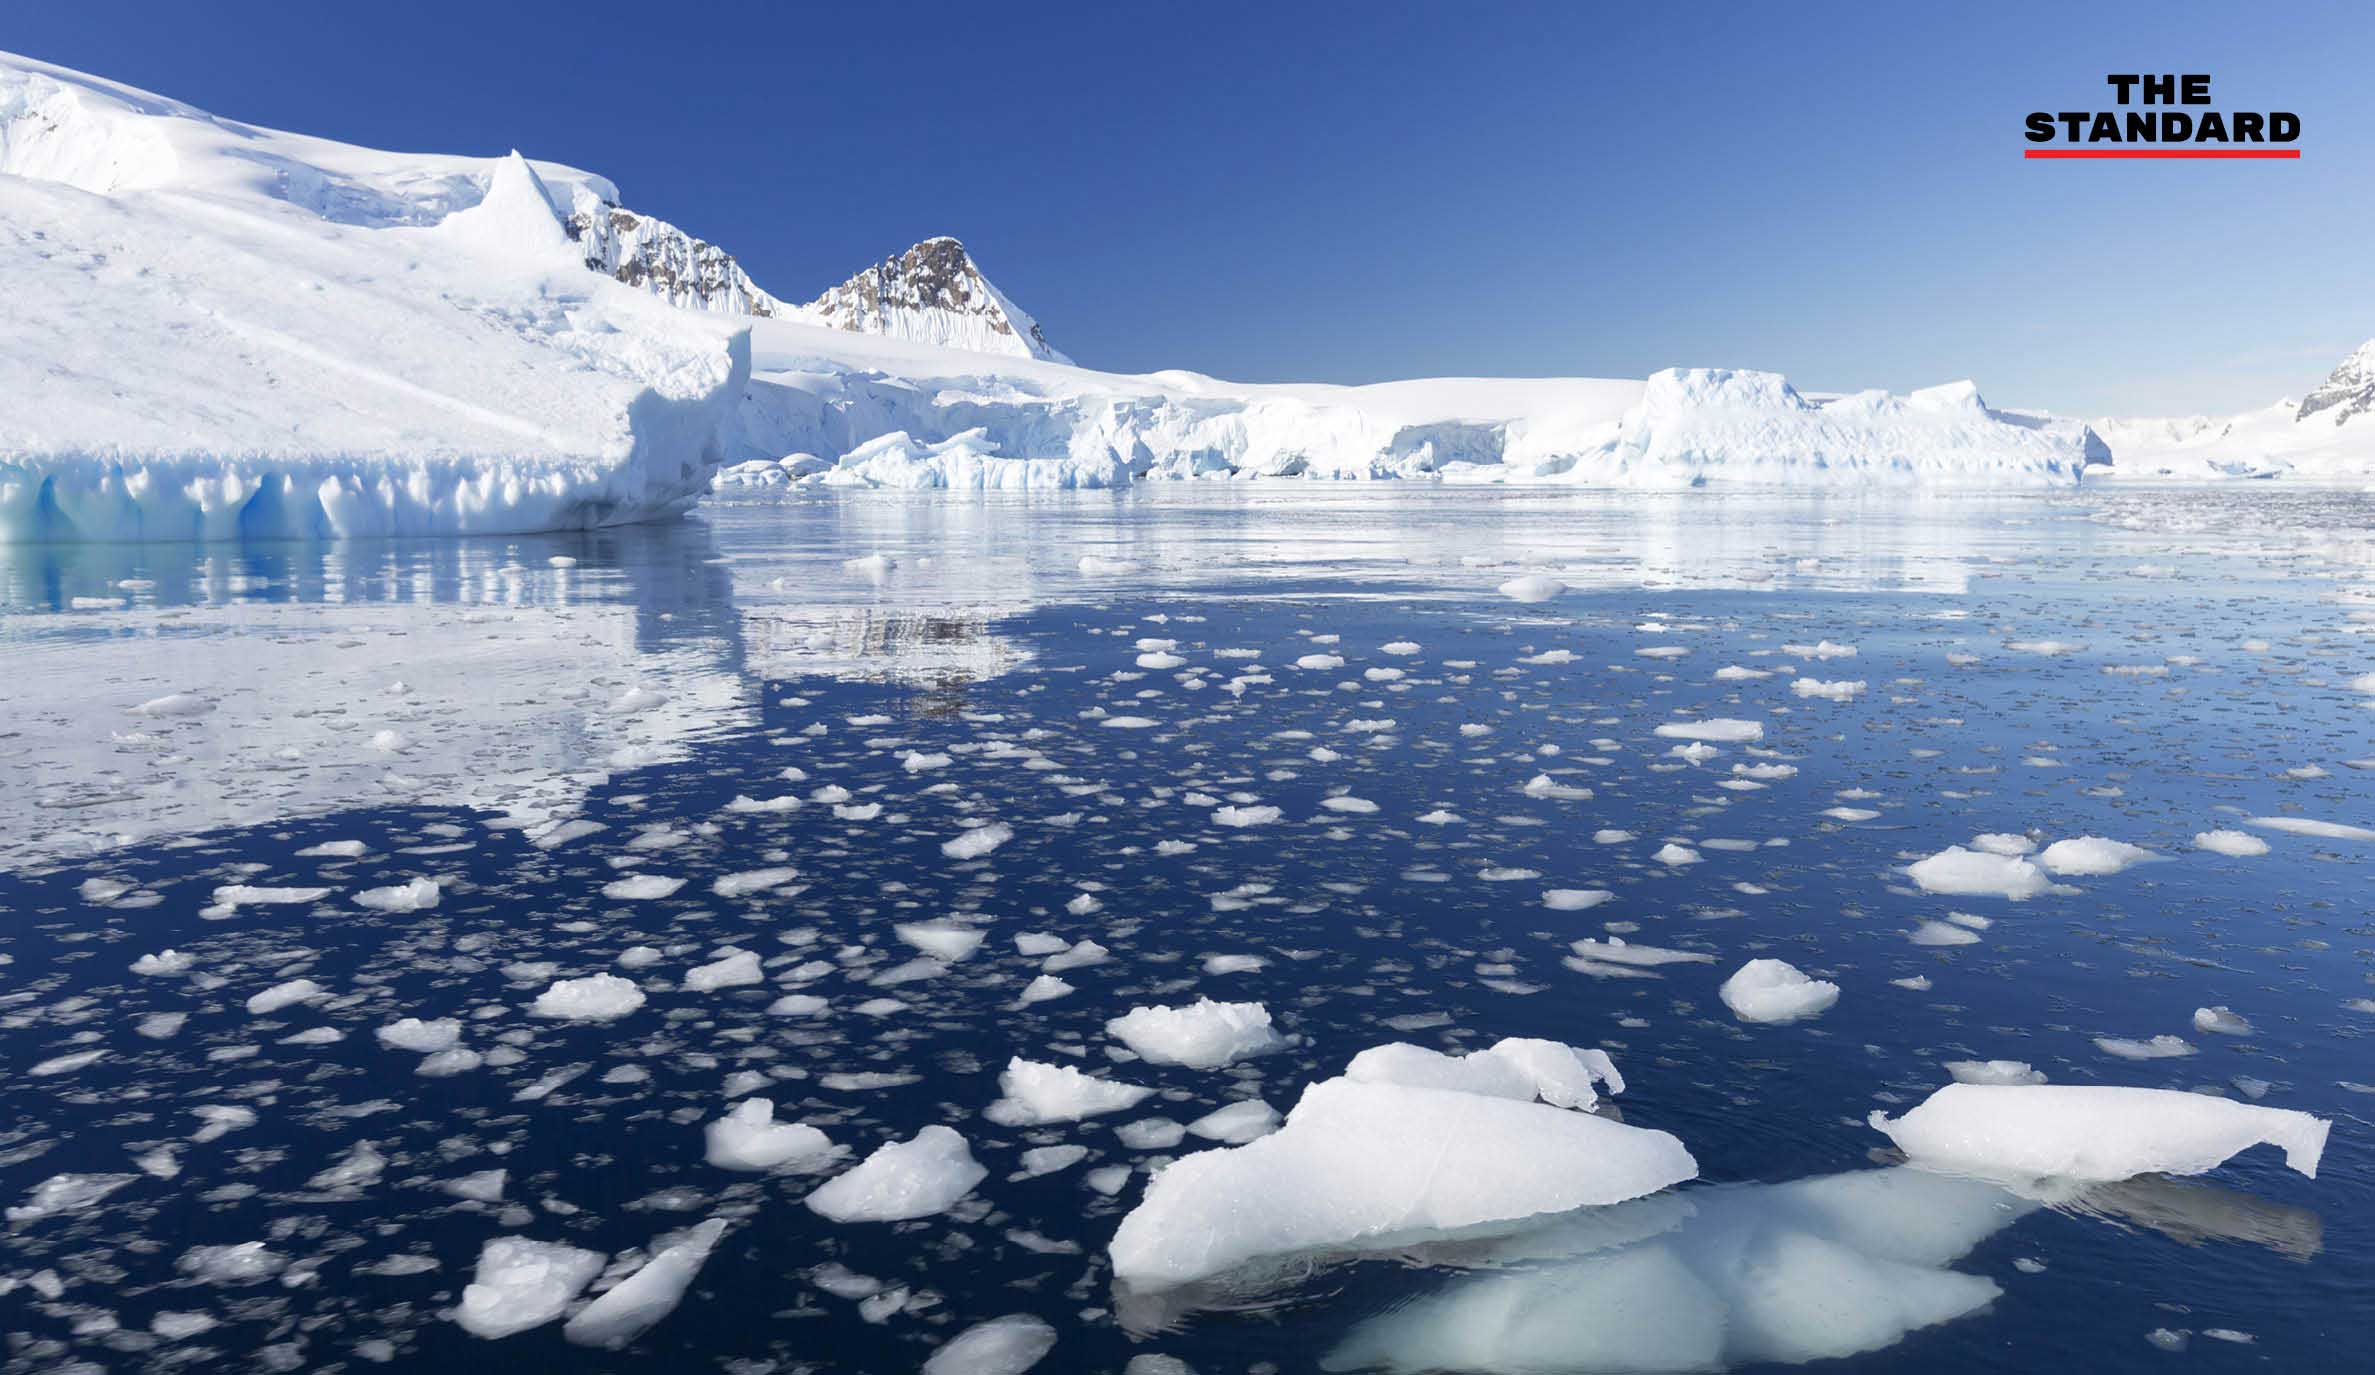 2-metre sea level rise 'plausible' by 2100